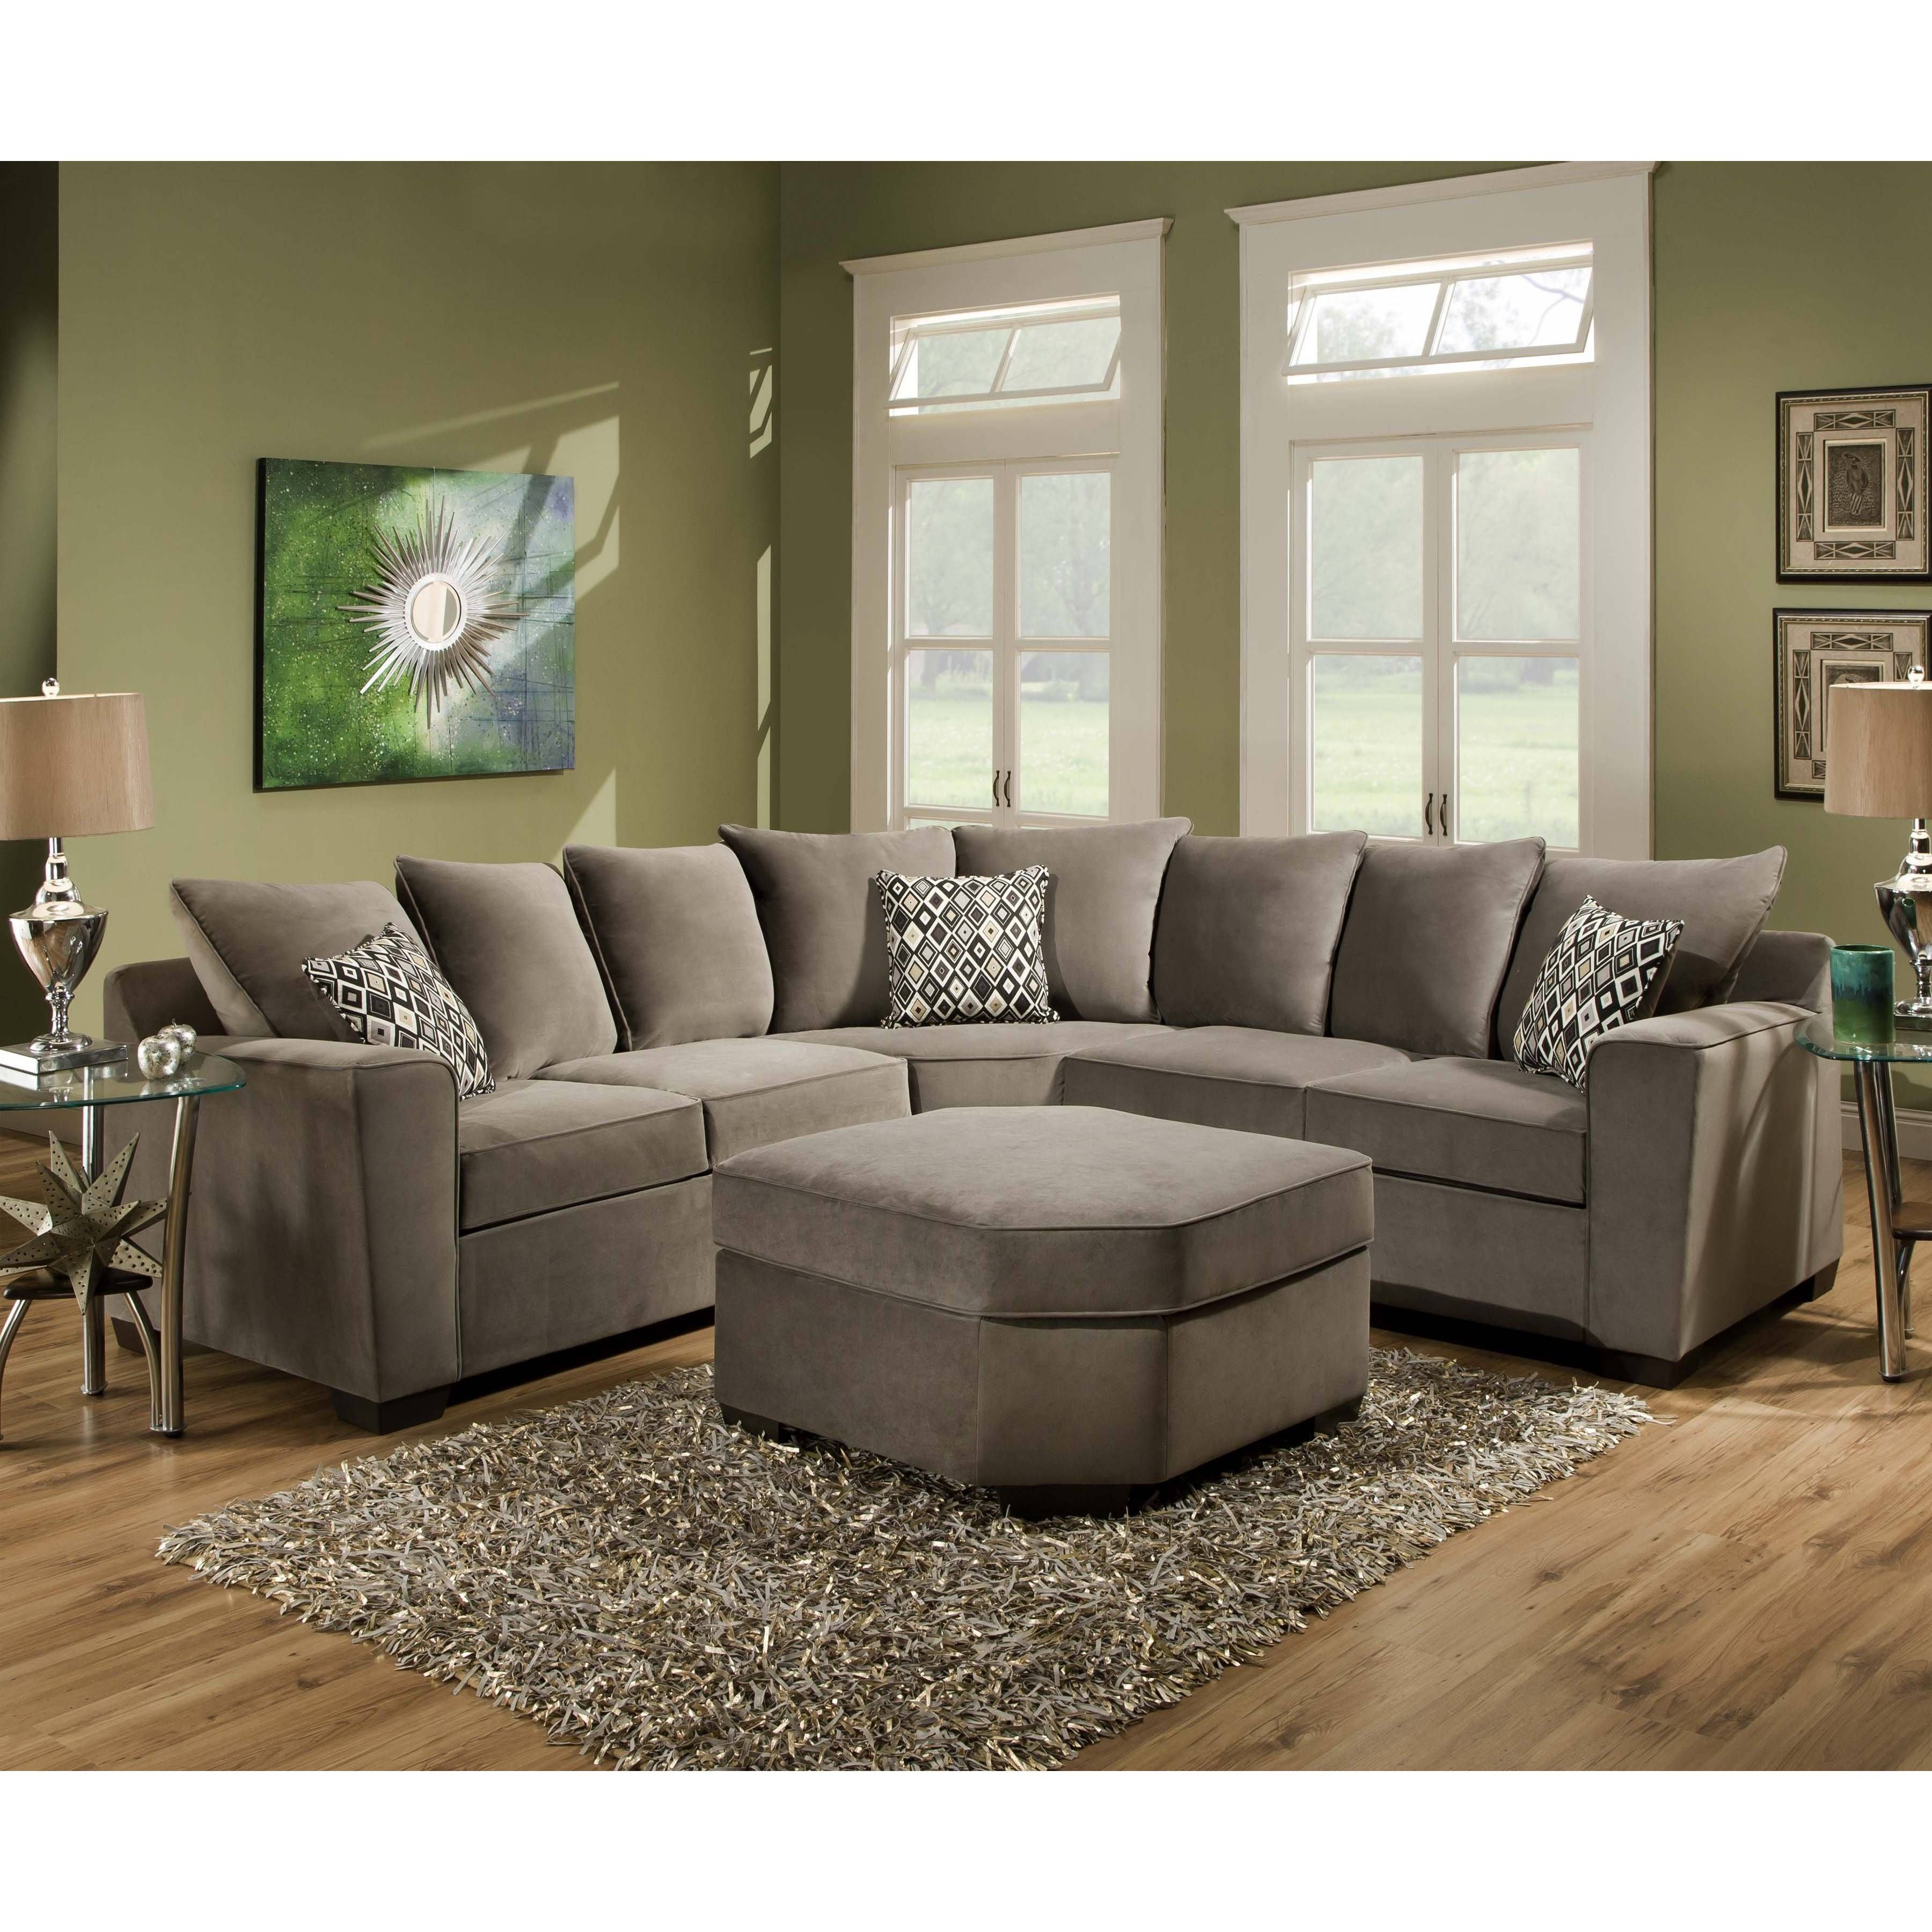 Traditional Sectional Sofas Living Room Furniture – Simoon For Traditional Sectional Sofas Living Room Furniture (Photo 14 of 25)